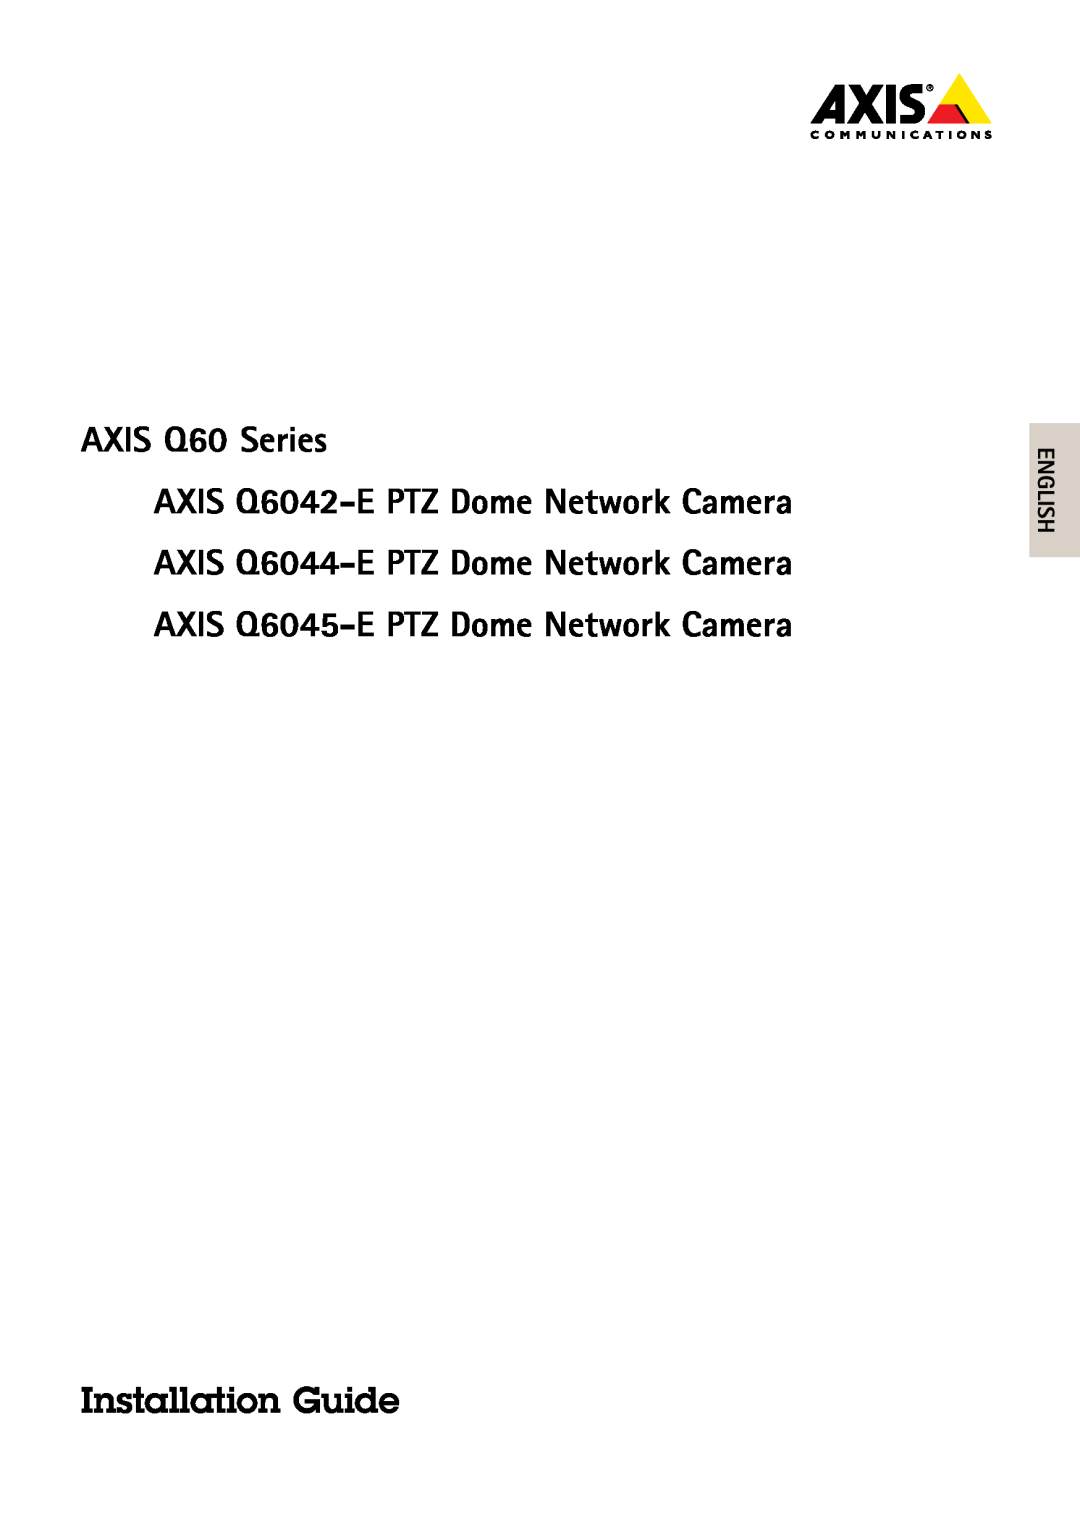 Axis Communications user manual User Manual, AXIS Q6045-EPTZ Dome Network Camera 